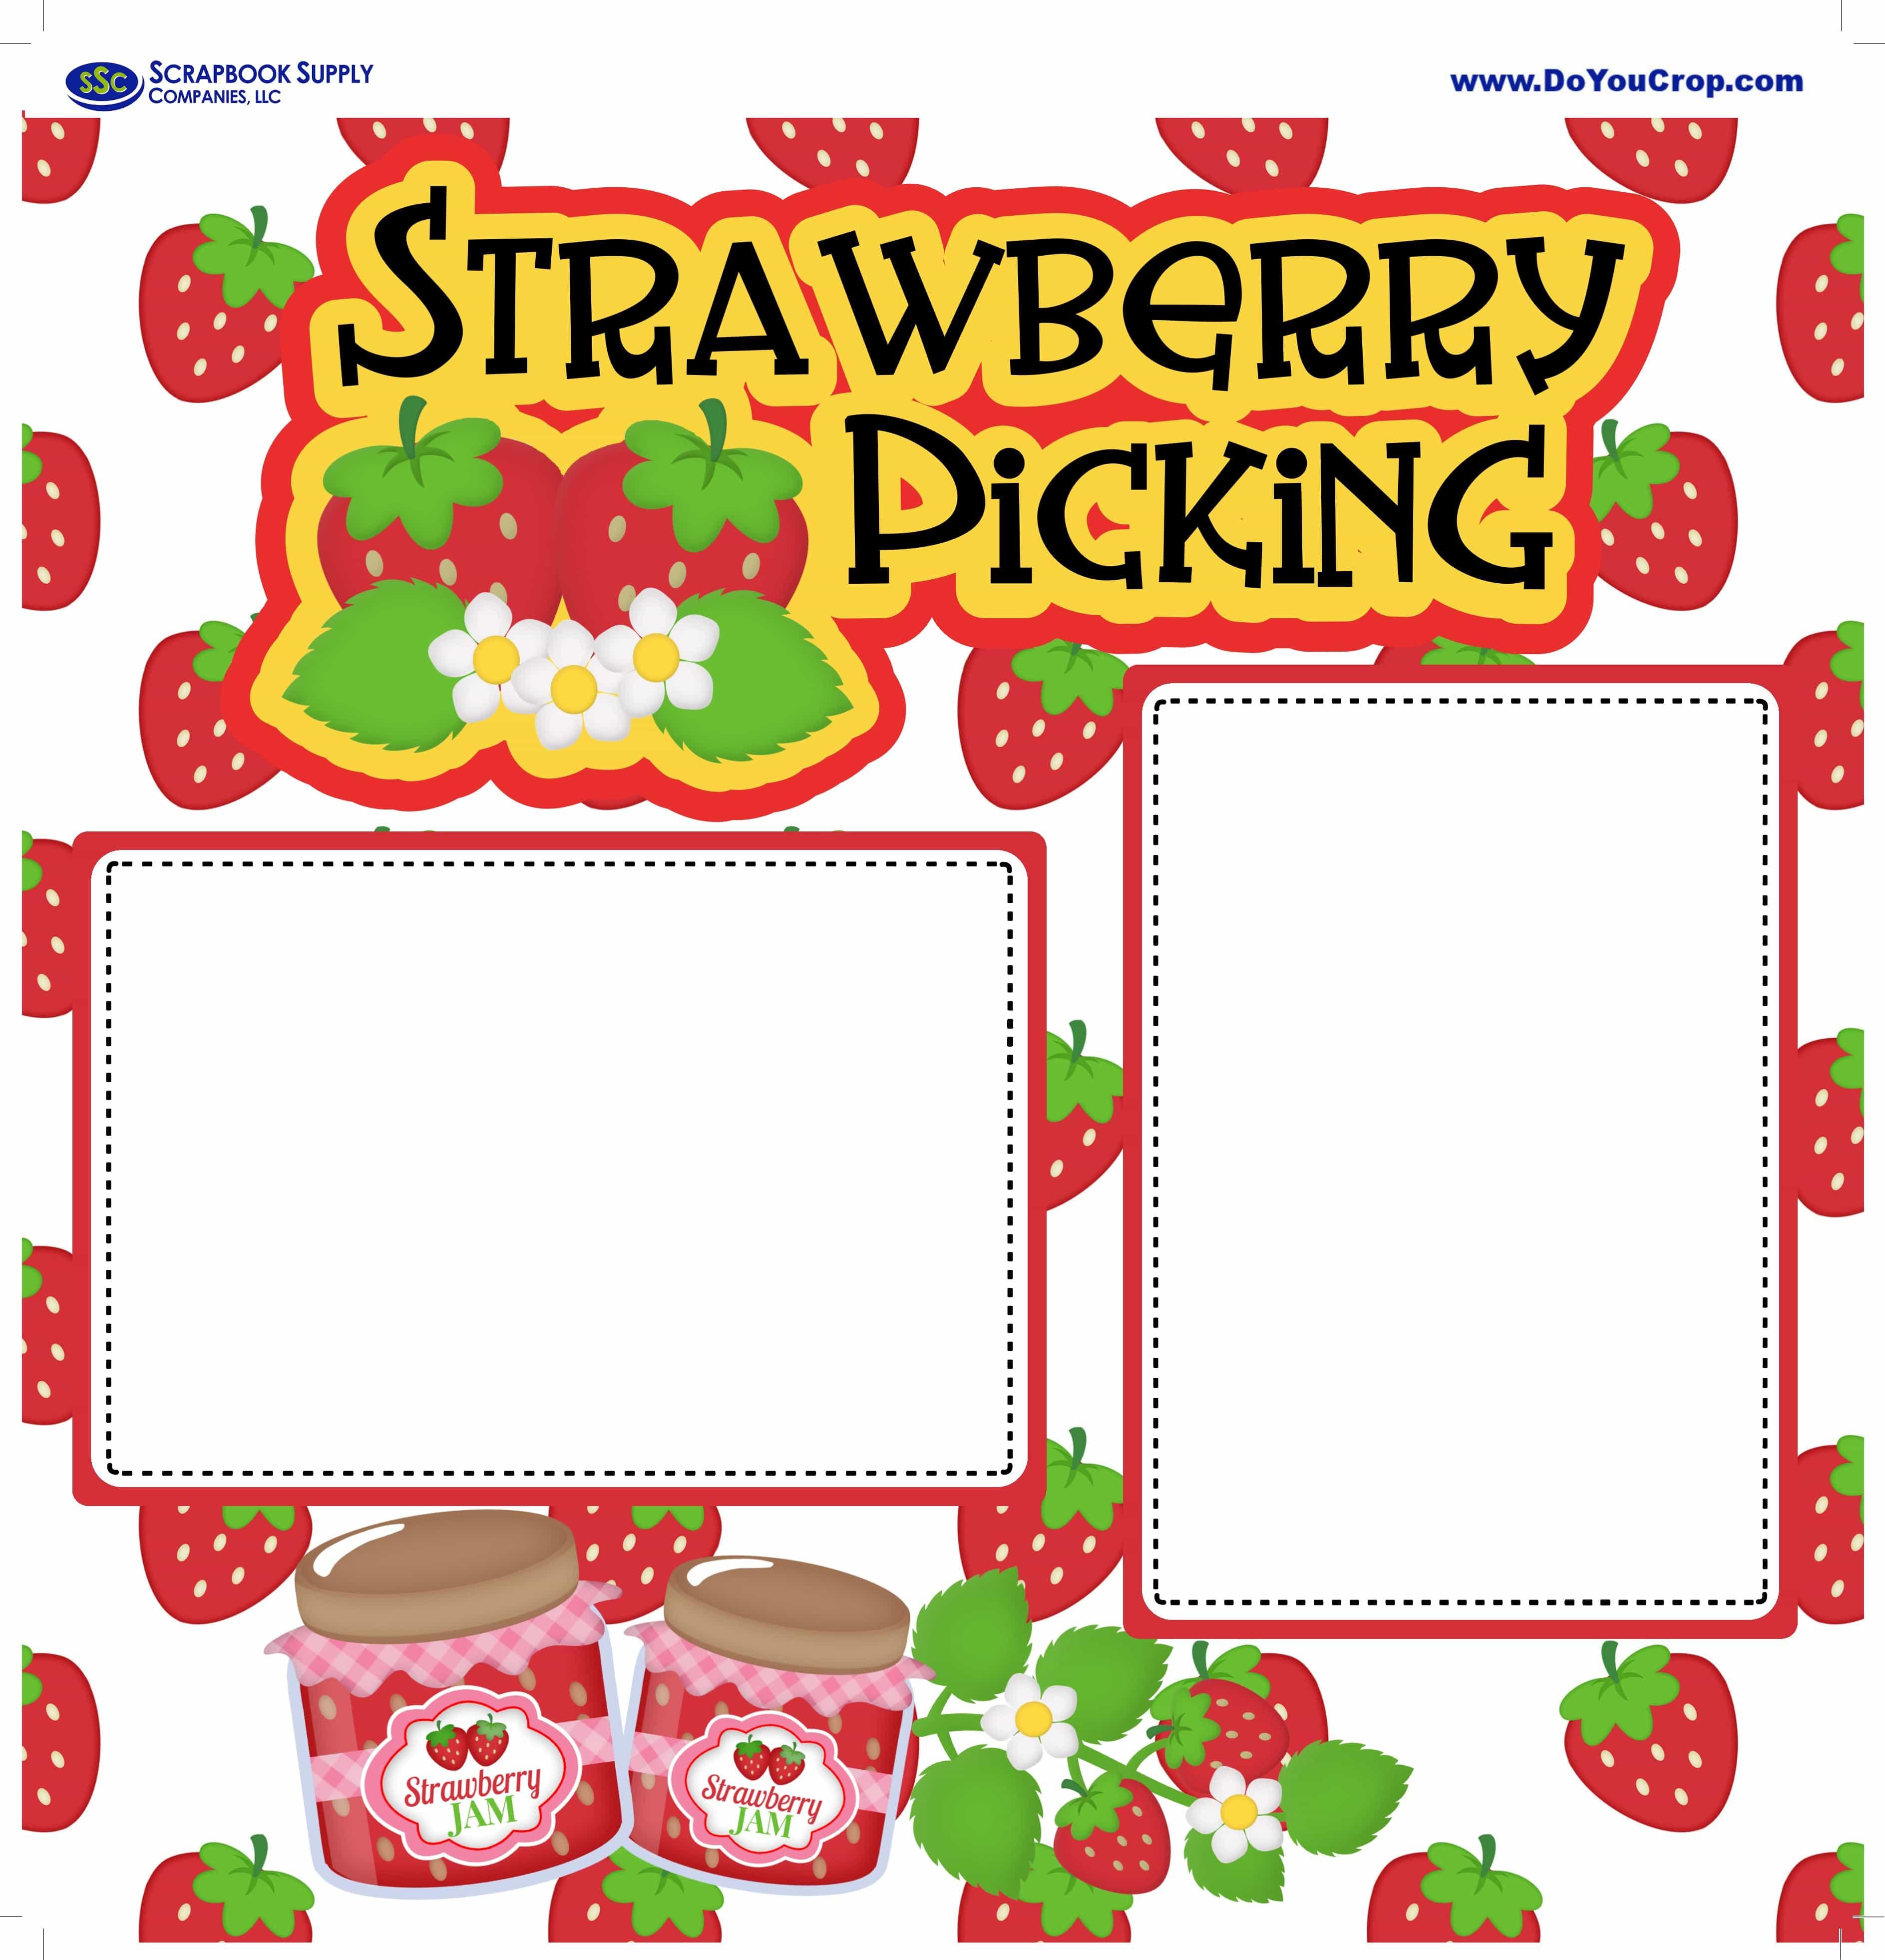 Picking Strawberries (2) - 12 x 12 Premade, Printed Scrapbook Pages by SSC Designs - Scrapbook Supply Companies